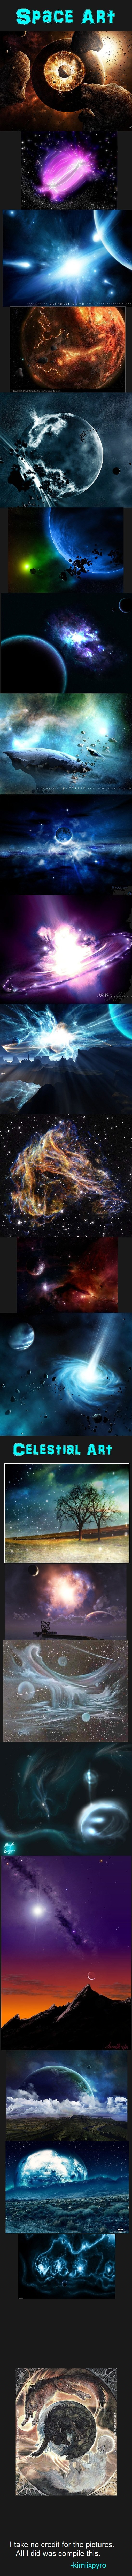 Awesome celestial pictures